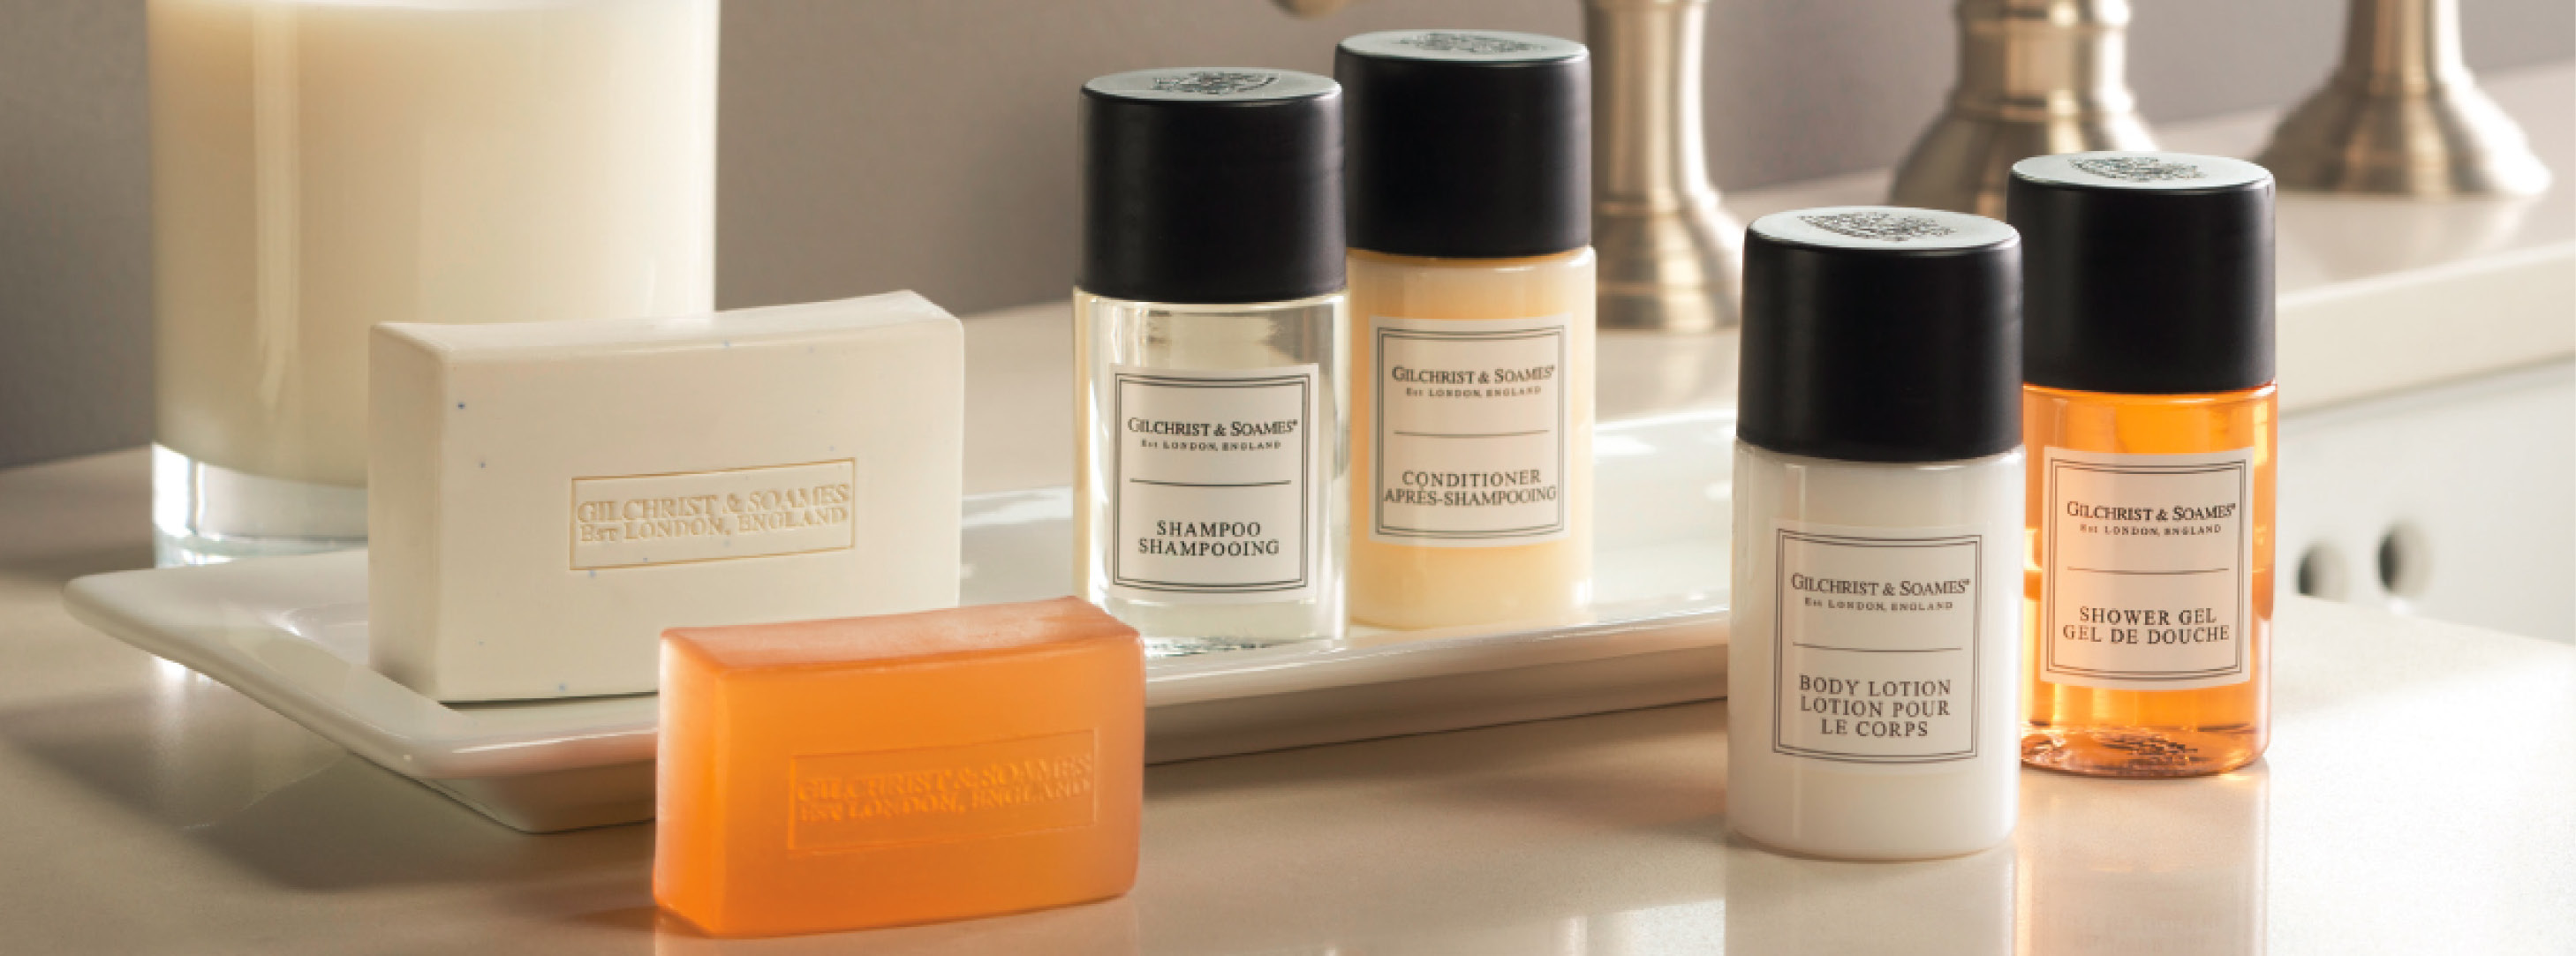 Personal Care Amenities